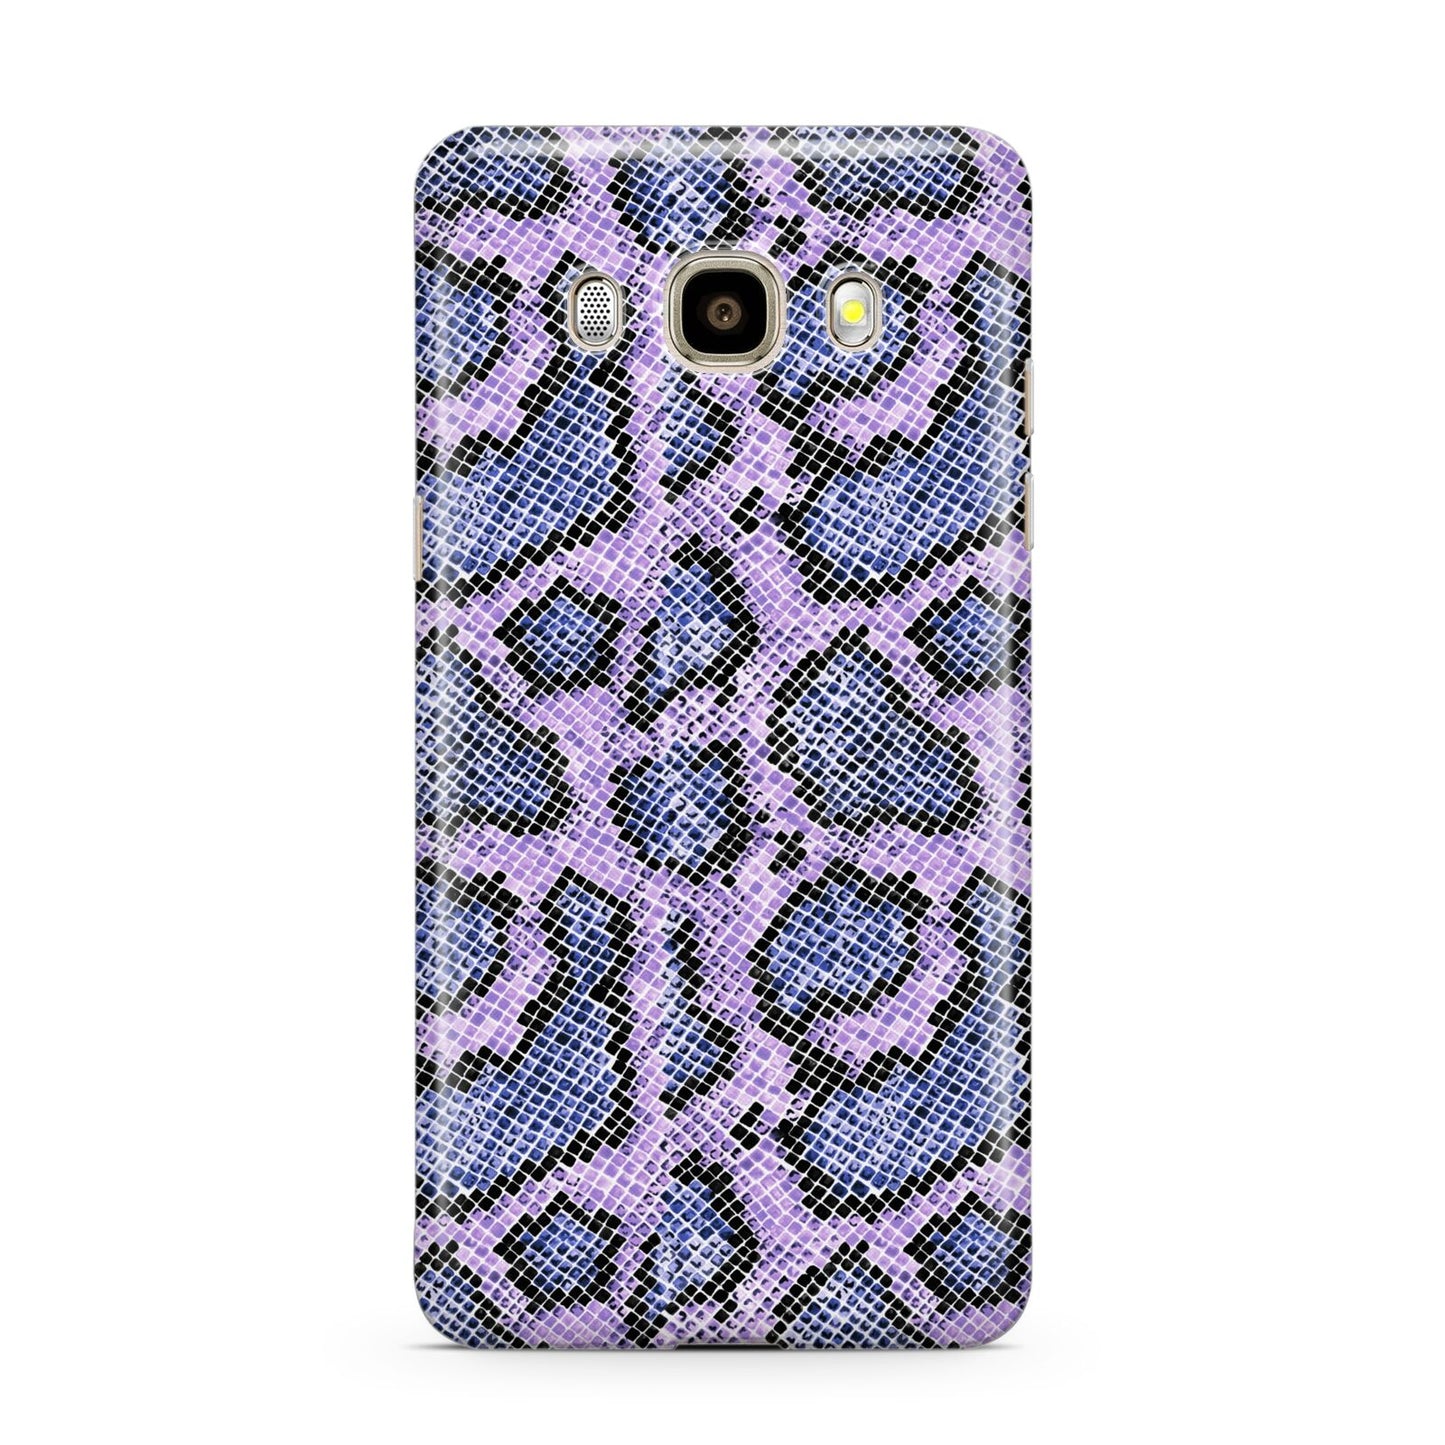 Purple And Blue Snakeskin Samsung Galaxy J7 2016 Case on gold phone